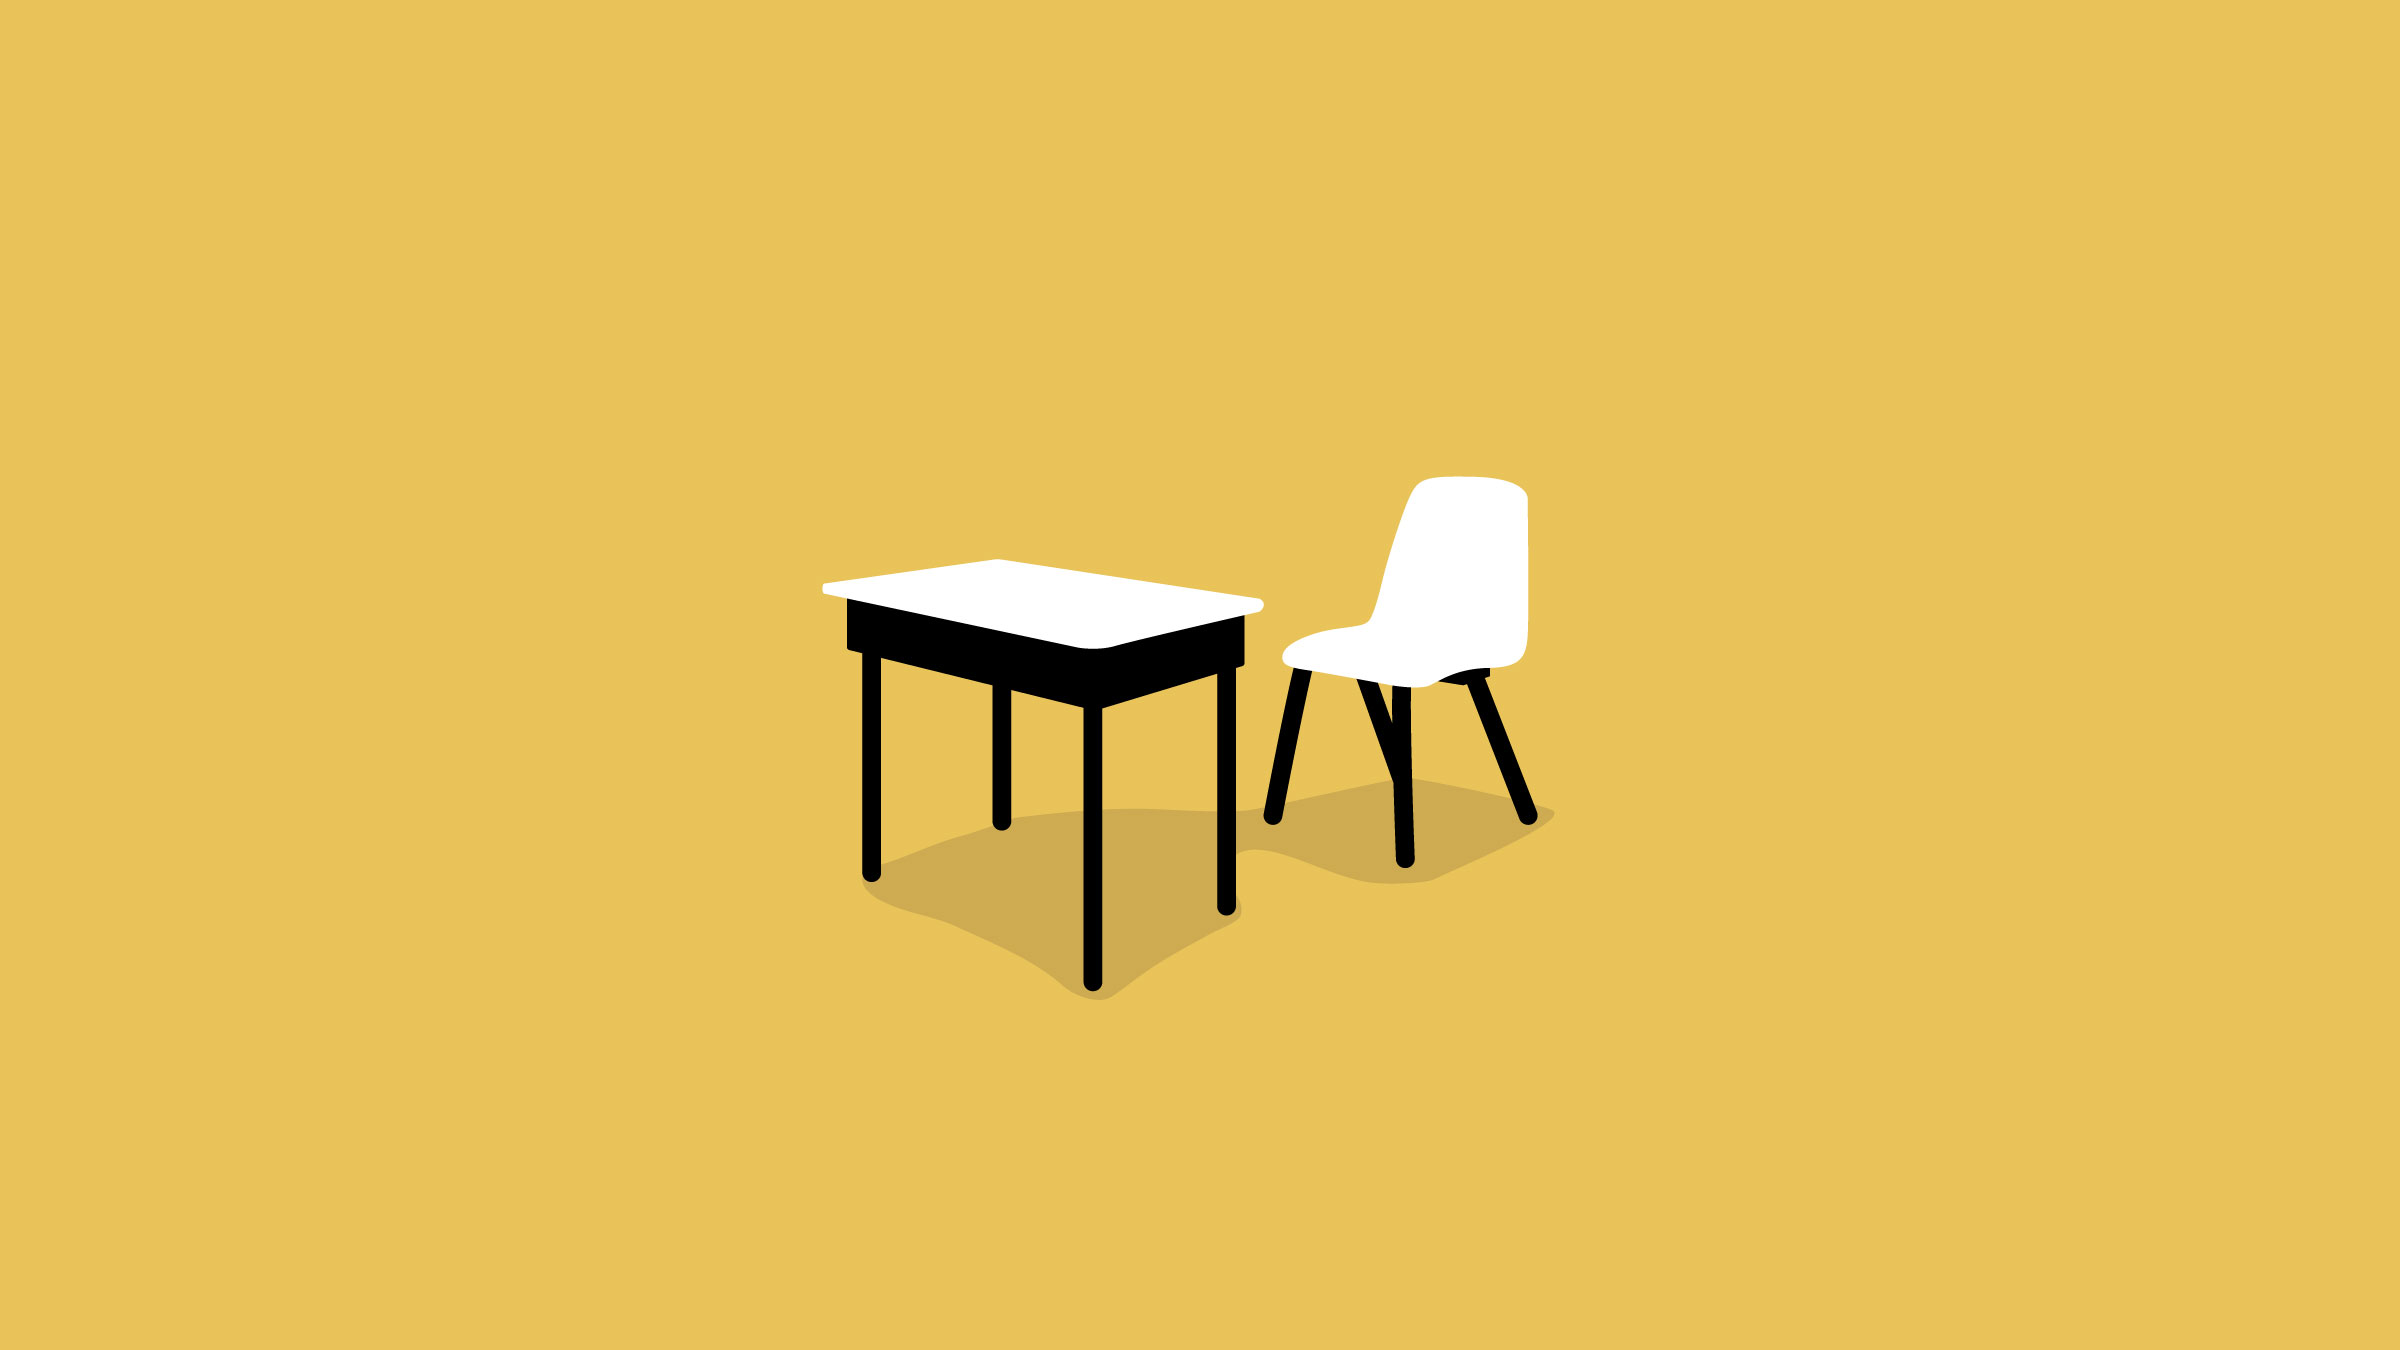 An illustration of an empty chair and desk against a blank background